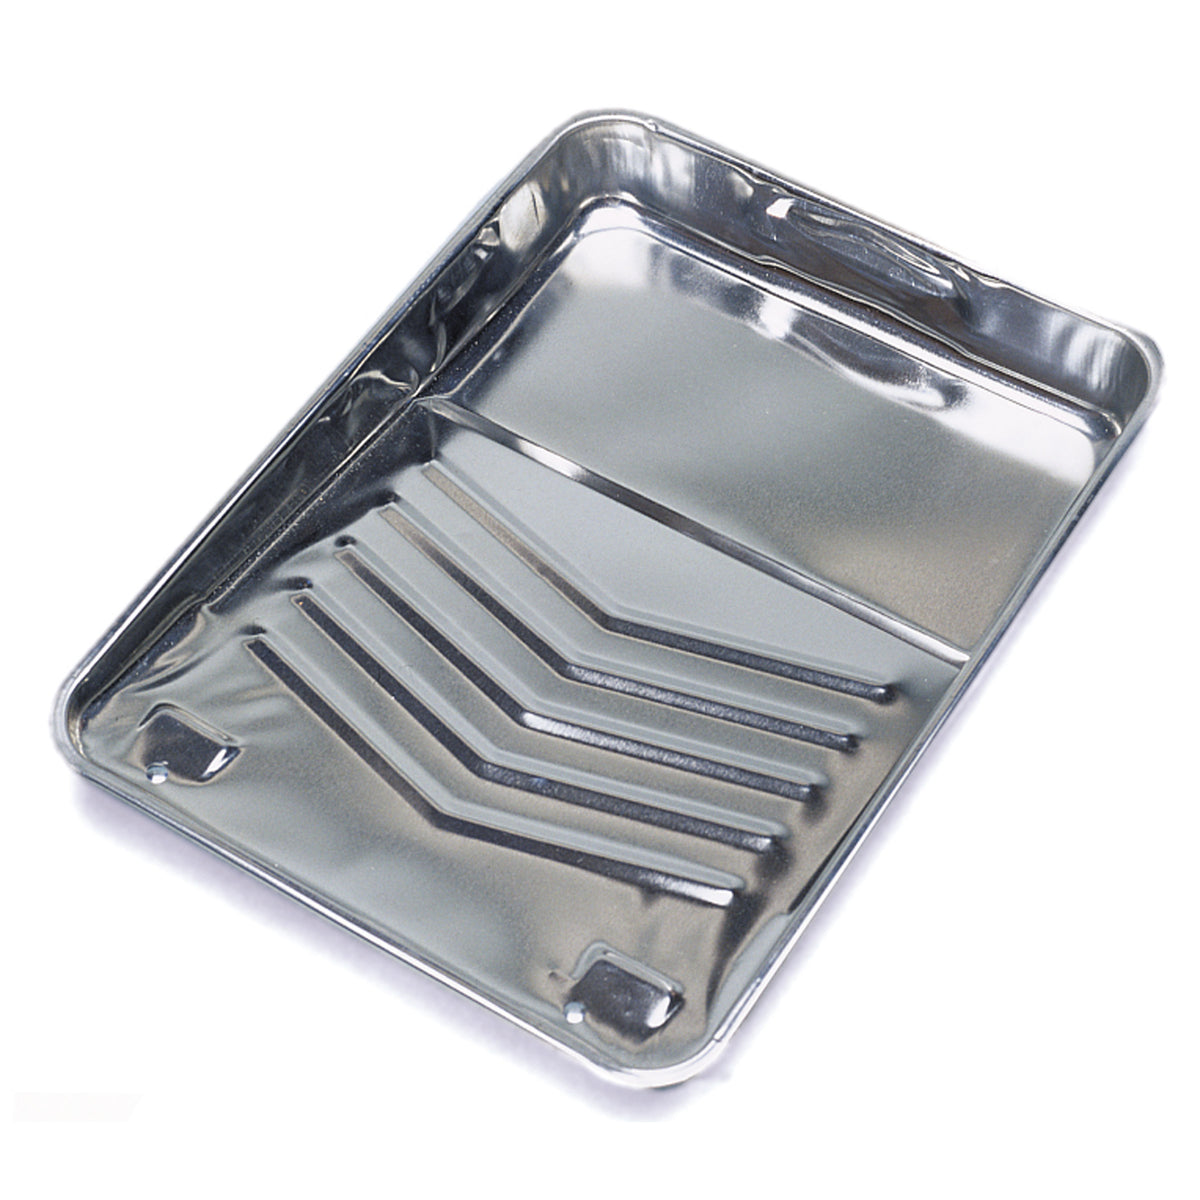 Redtree Industries 35001 Metal Paint Tray - 9"